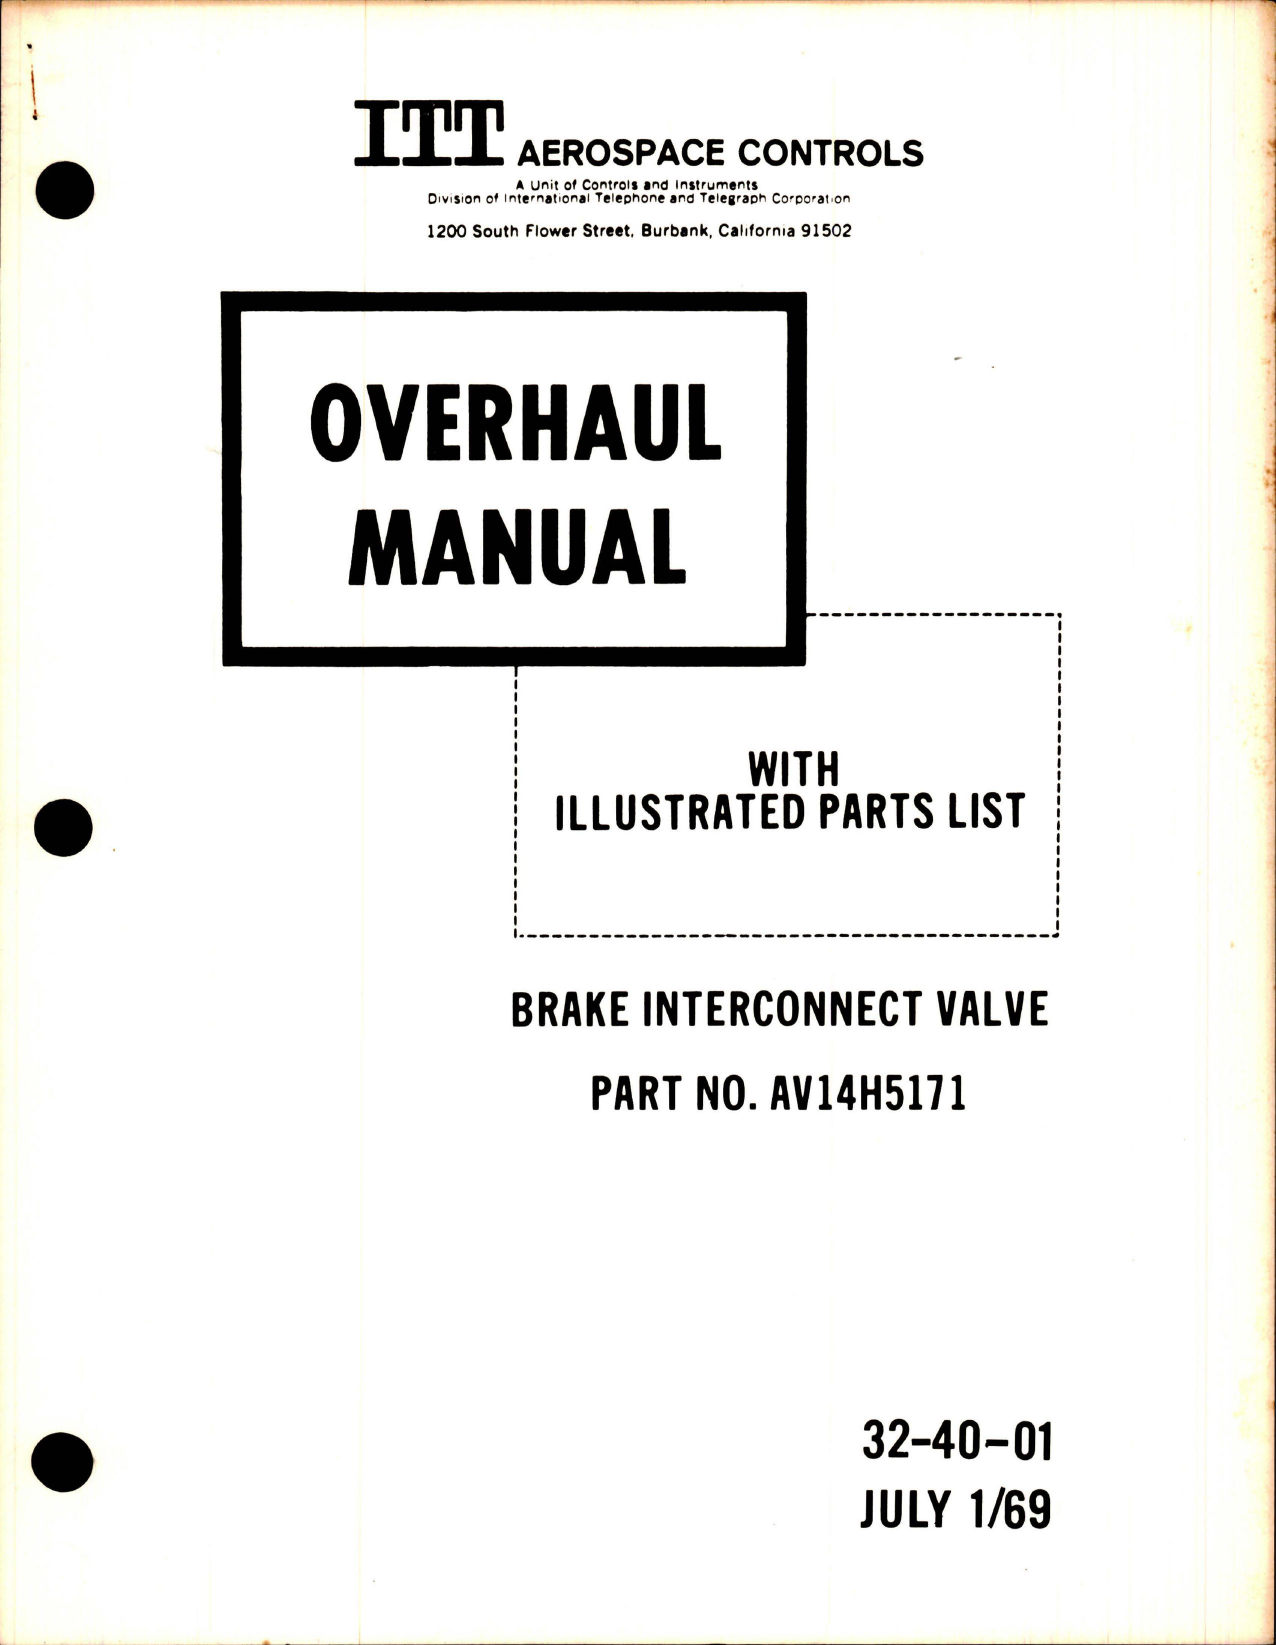 Sample page 1 from AirCorps Library document: Overhaul Instructions with Illustrated Parts List for Brake Interconnect Valve 